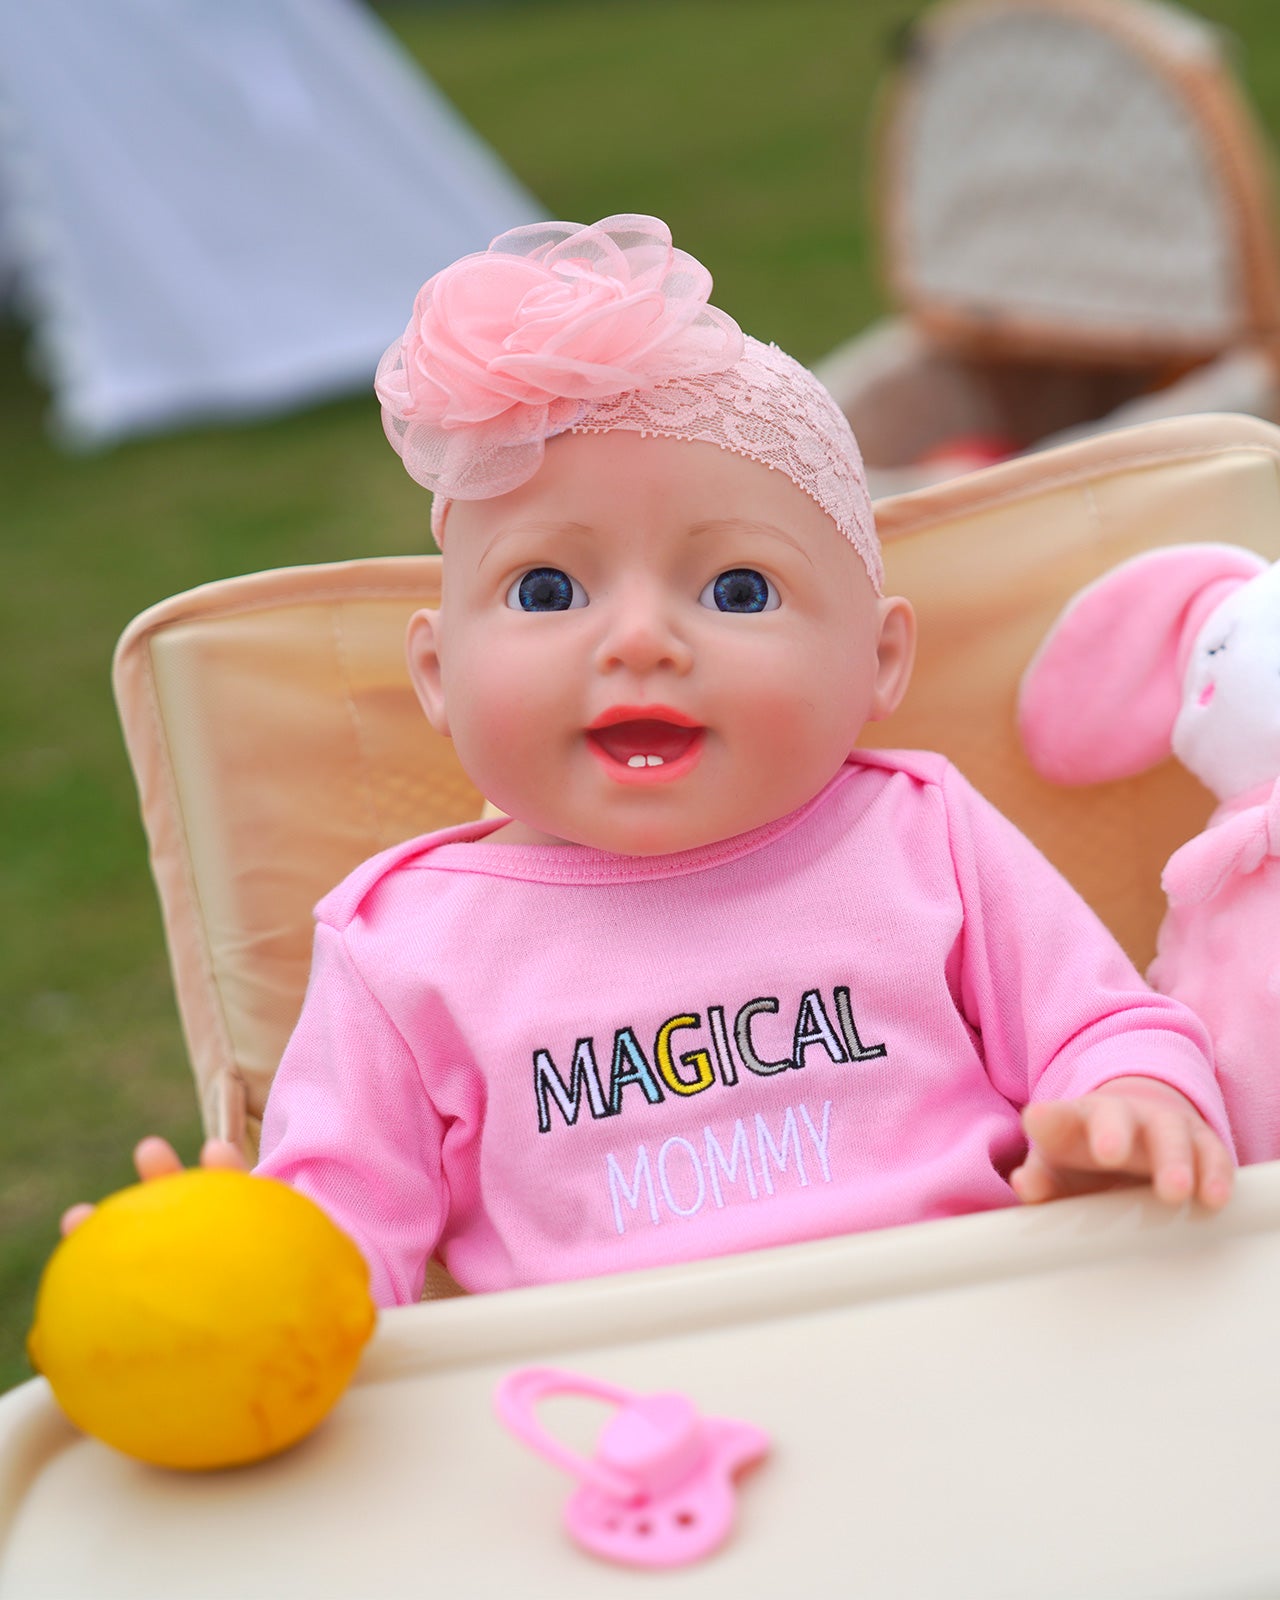 Kids' Cycling Protective Gear Archives  Lifelike Reborn Dolls for  Sale❤️Cheap Realistic Silicone Newborn Baby Doll